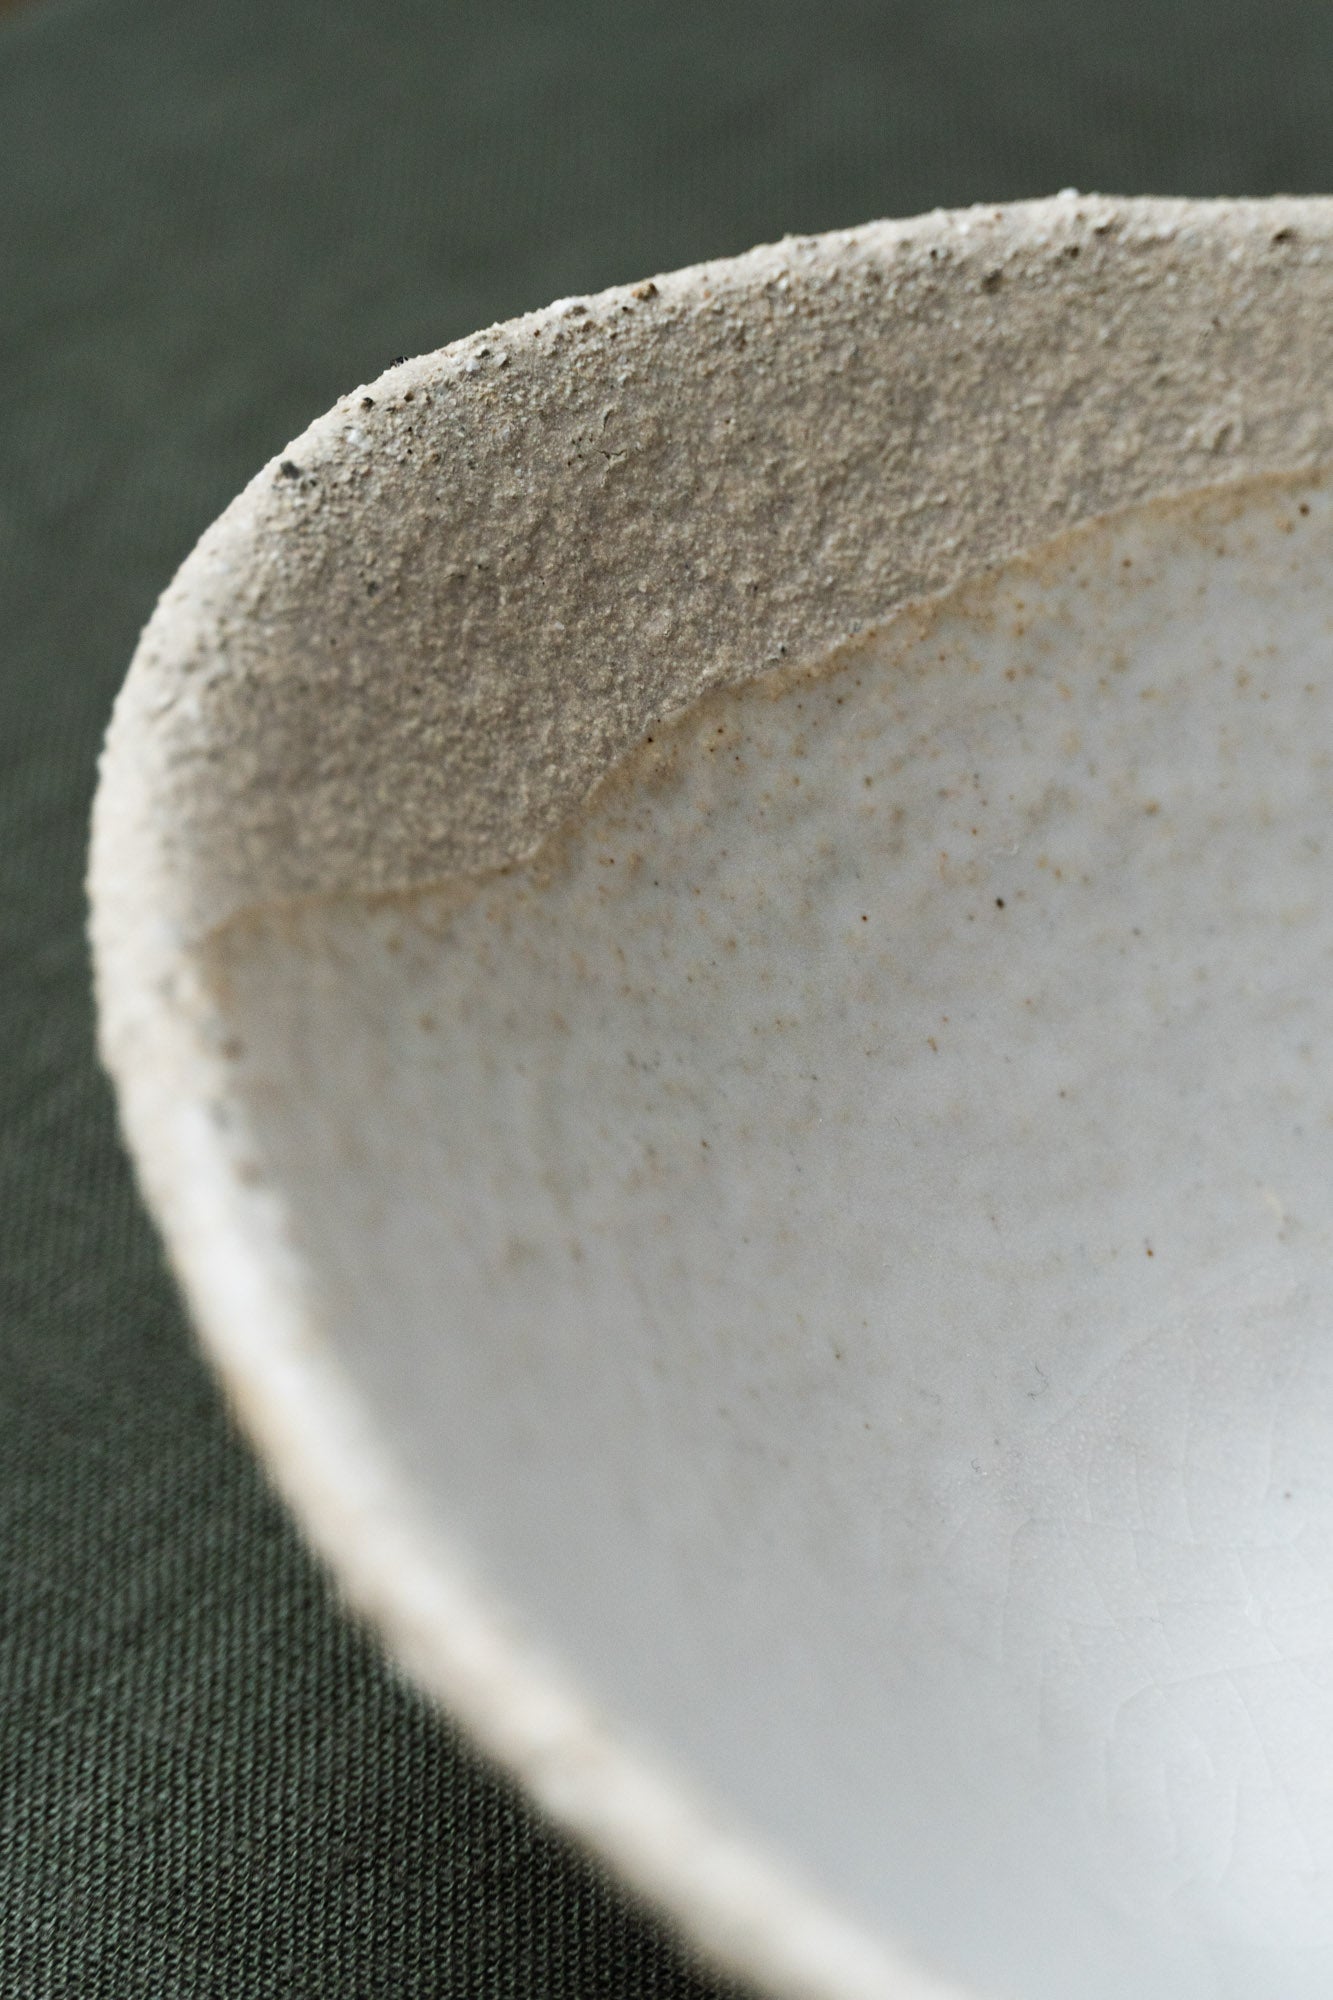 Details of the Wabi Textured Bowl by Jars Ceramistes.